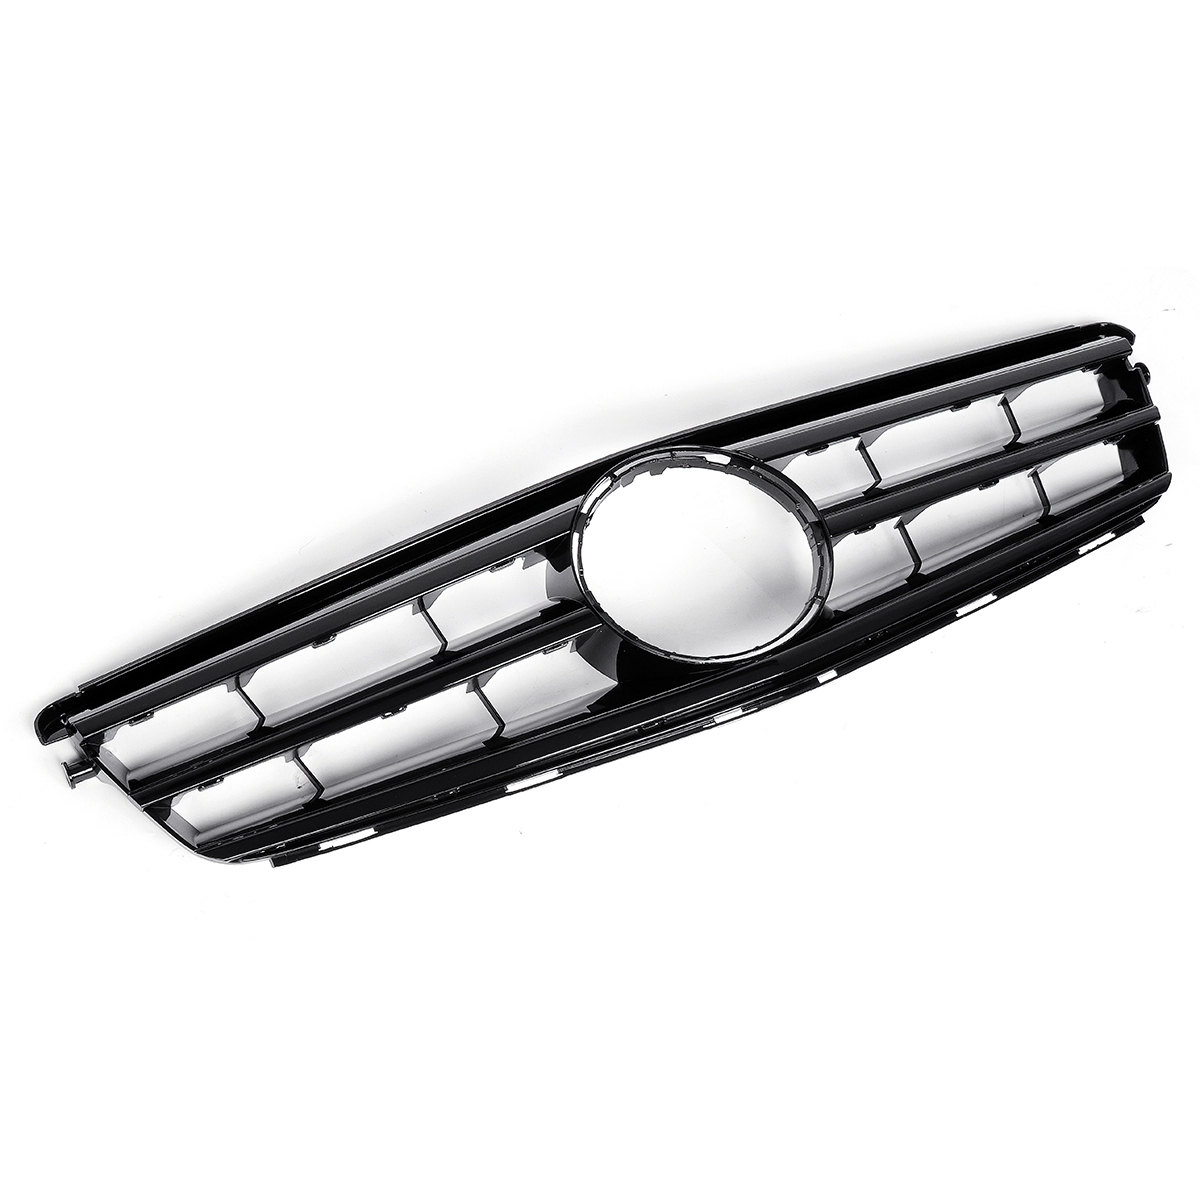 Car Glossy Black Front Upper Grille Grill for Mercedes C Class W204 C180 C200 C300 C350 2008-2014